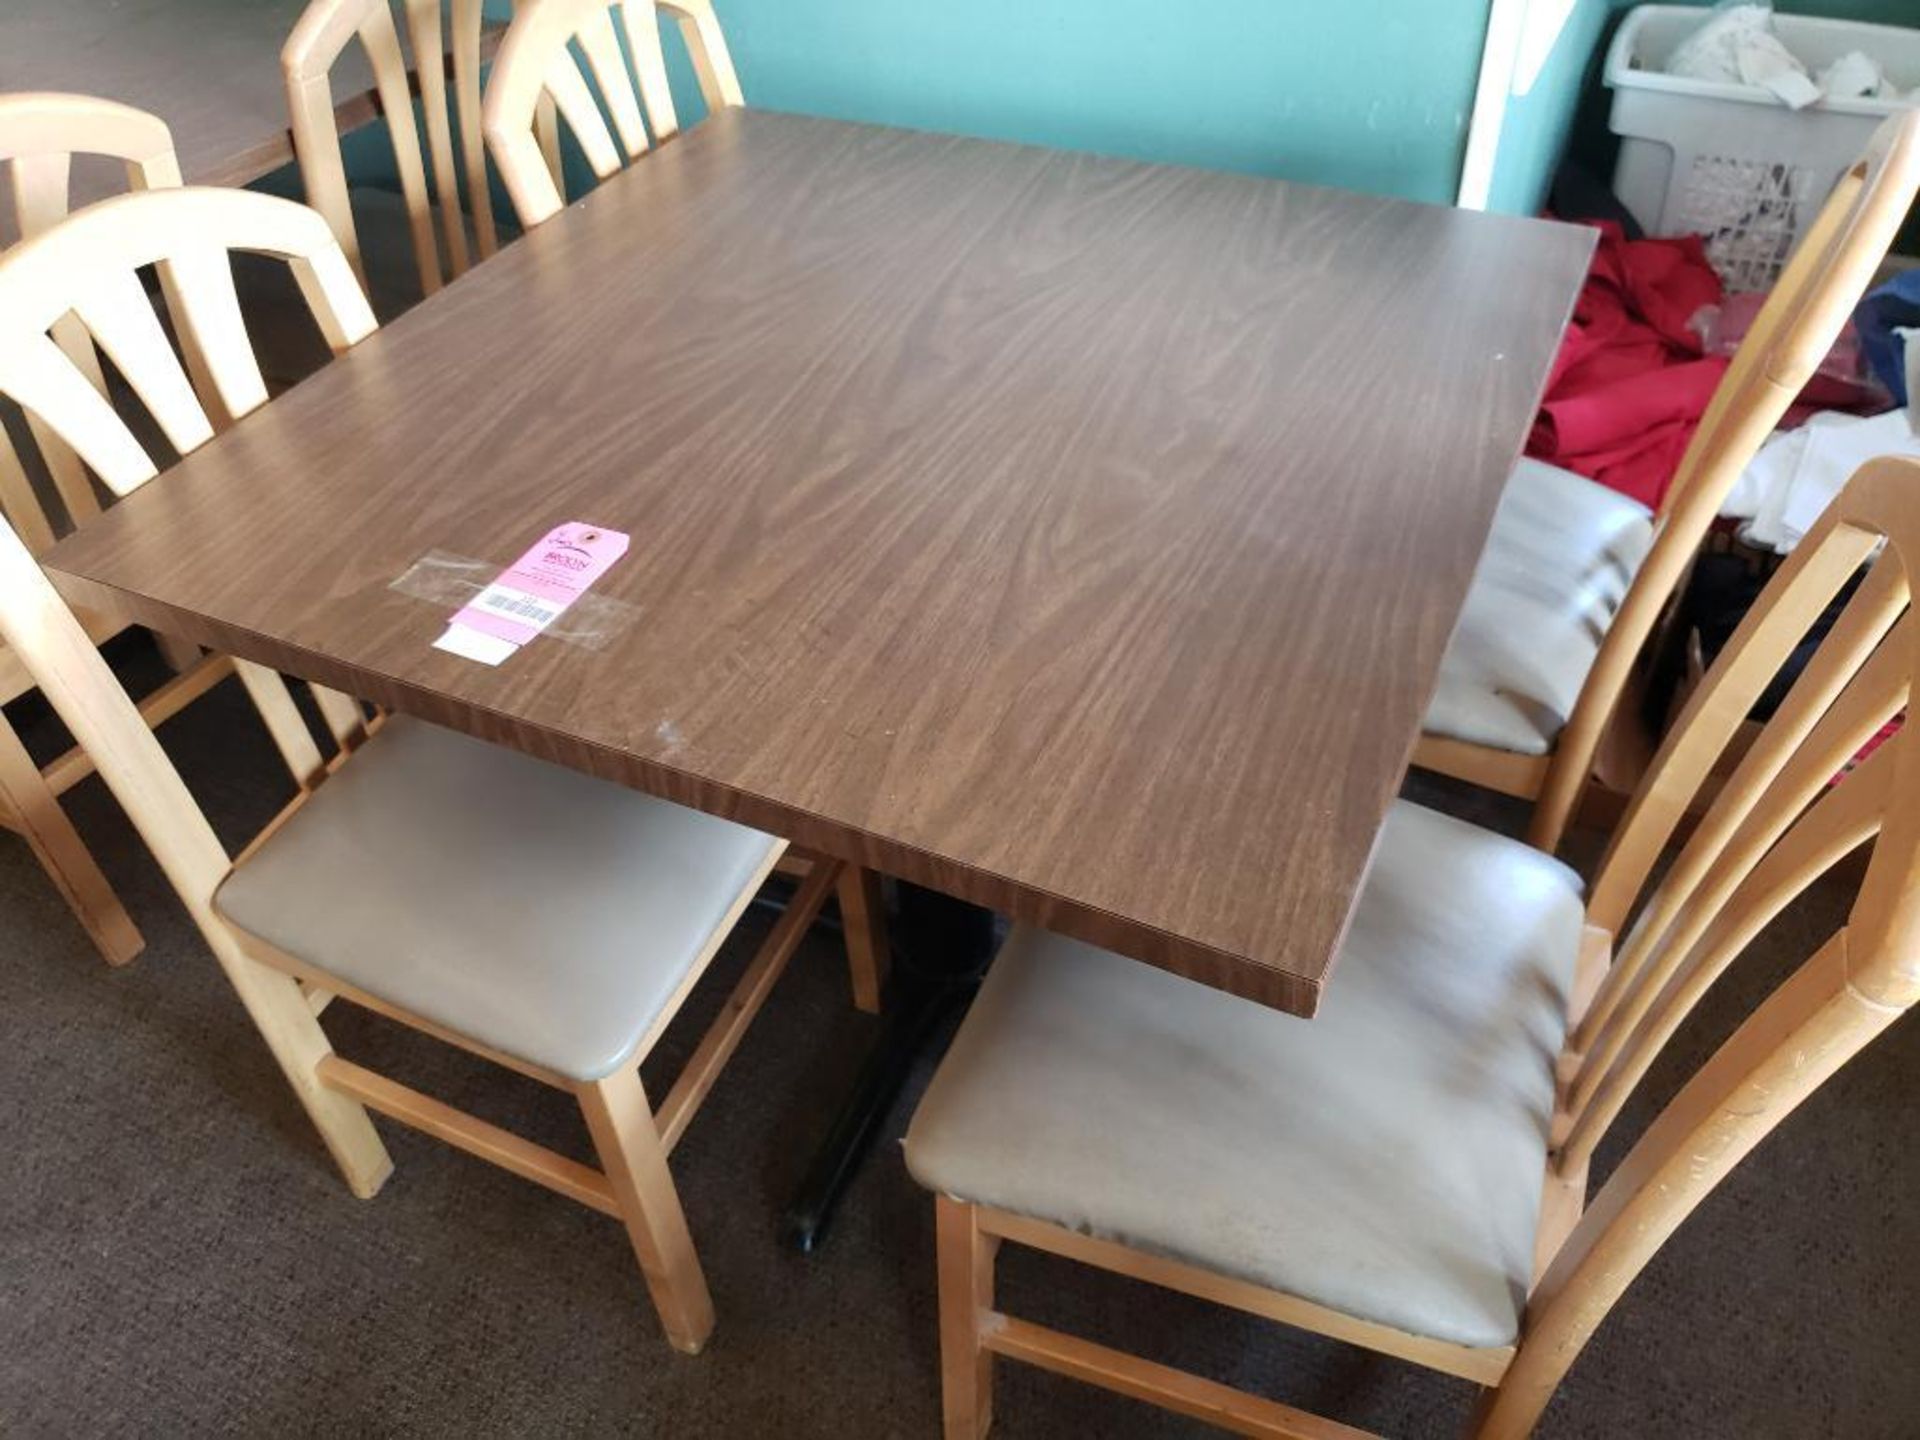 Table with 4 chairs. Table size 35in x 35in.